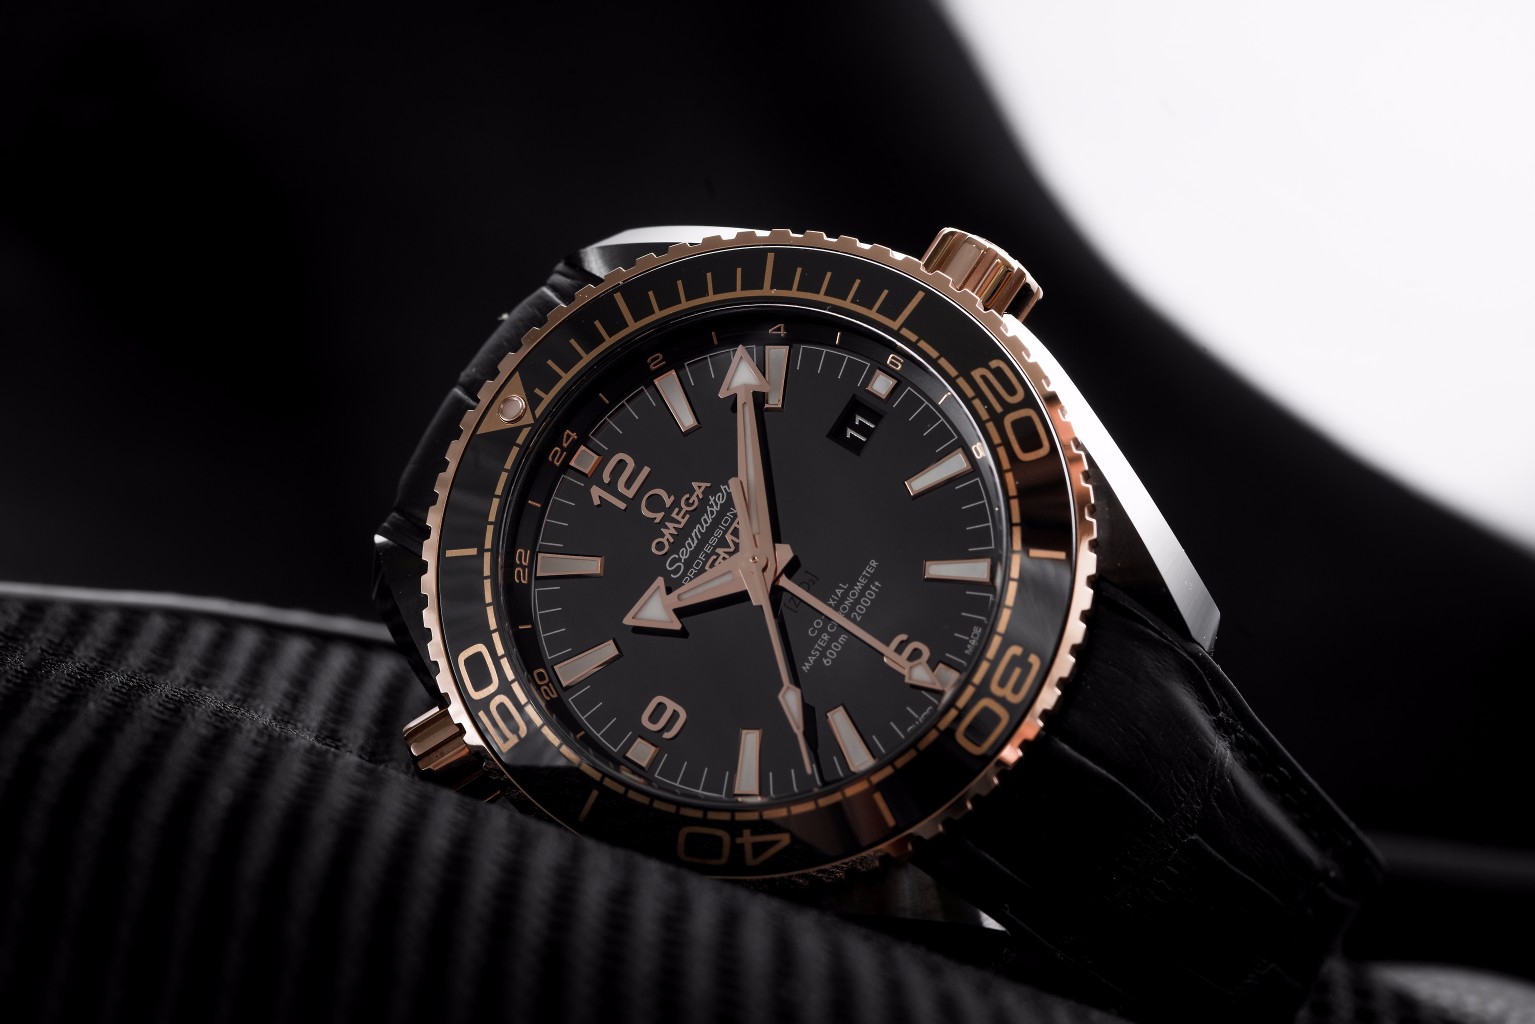 Presenting The Omega Seamaster Planet Ocean “Deep Black” Collection